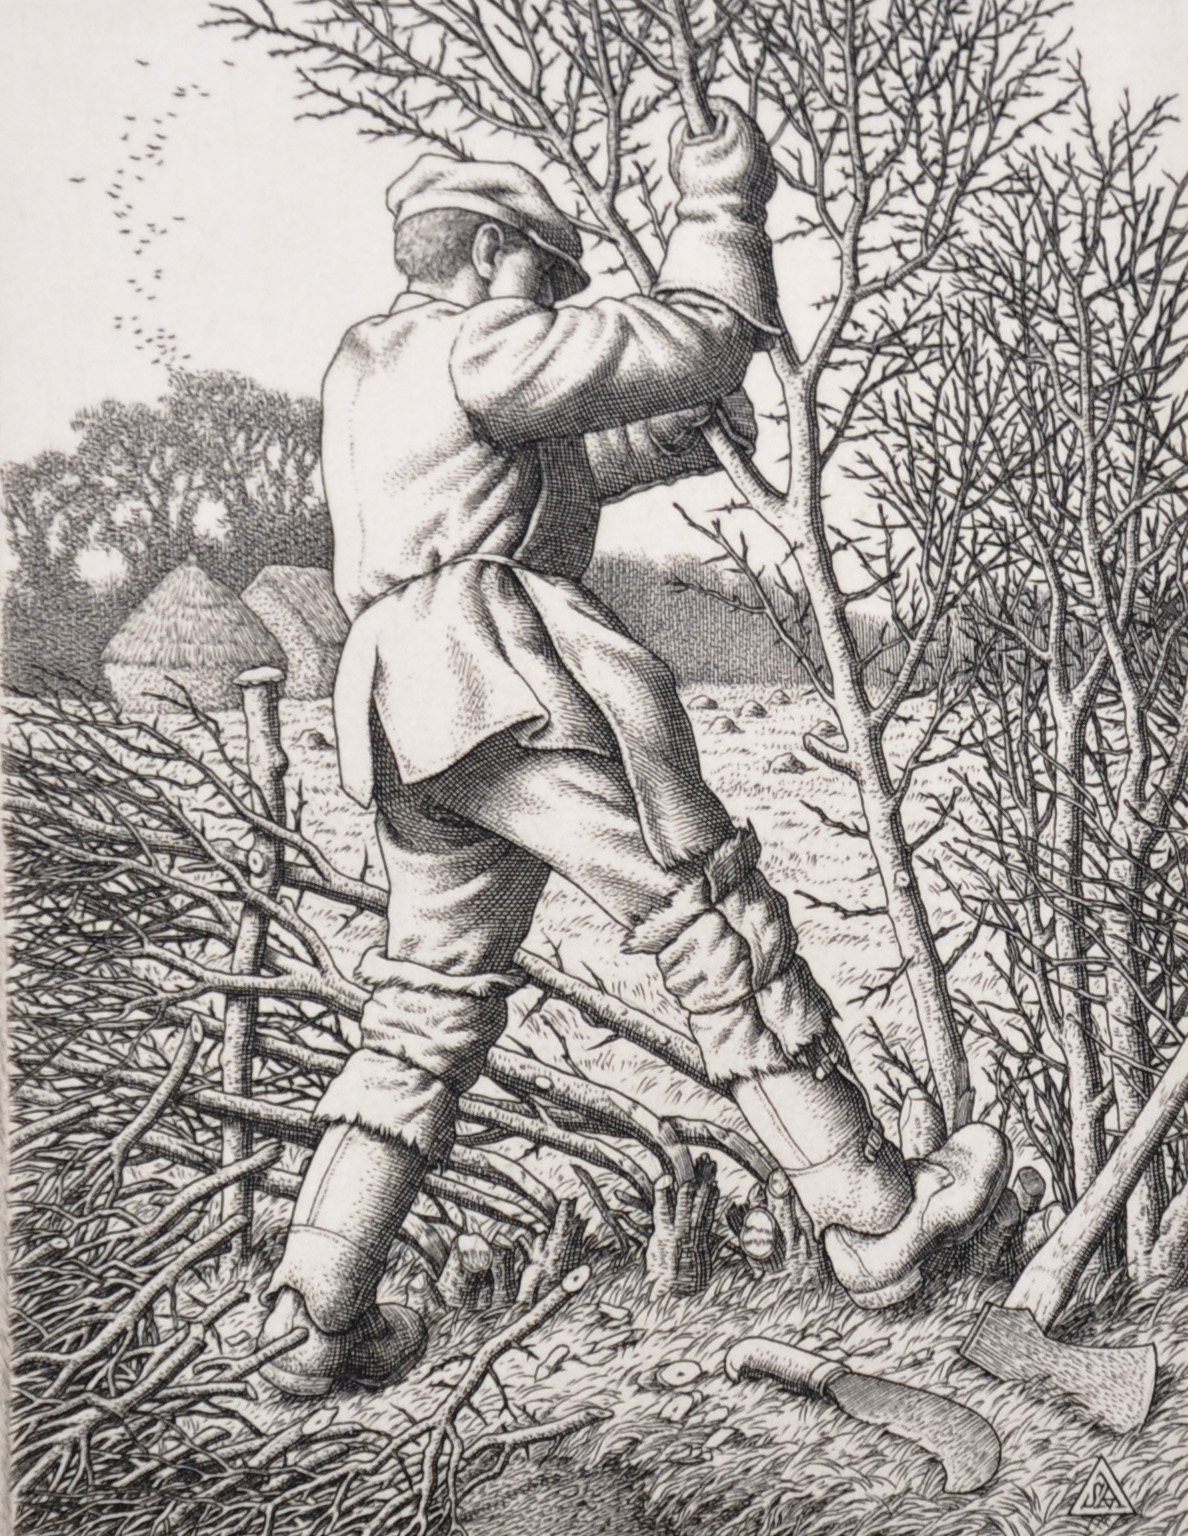 Stanley Anderson (1884-1966) British. “Hedge-laying”, Etching, Signed in Pencil, Mounted,